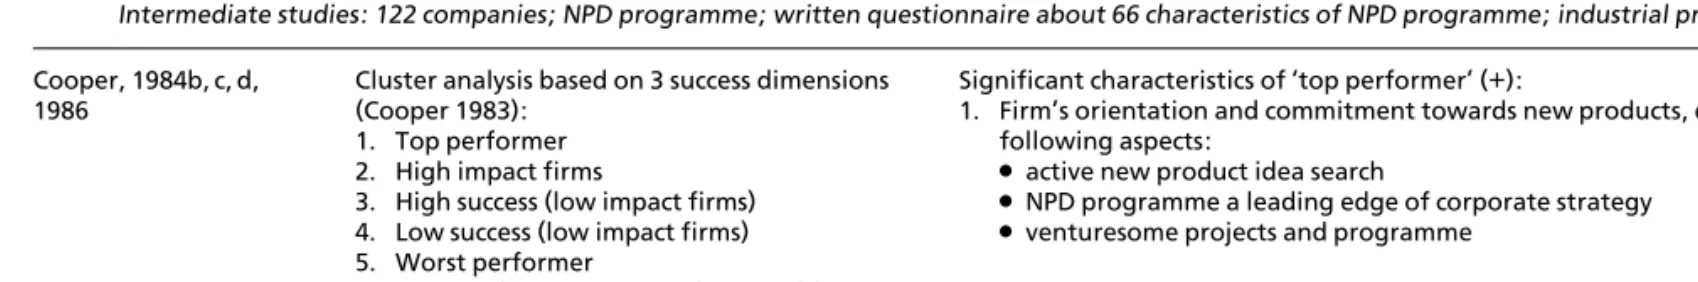 Table 5. Empirical results: cultural aspects of NPD (Cooper and Kleinschmidt)